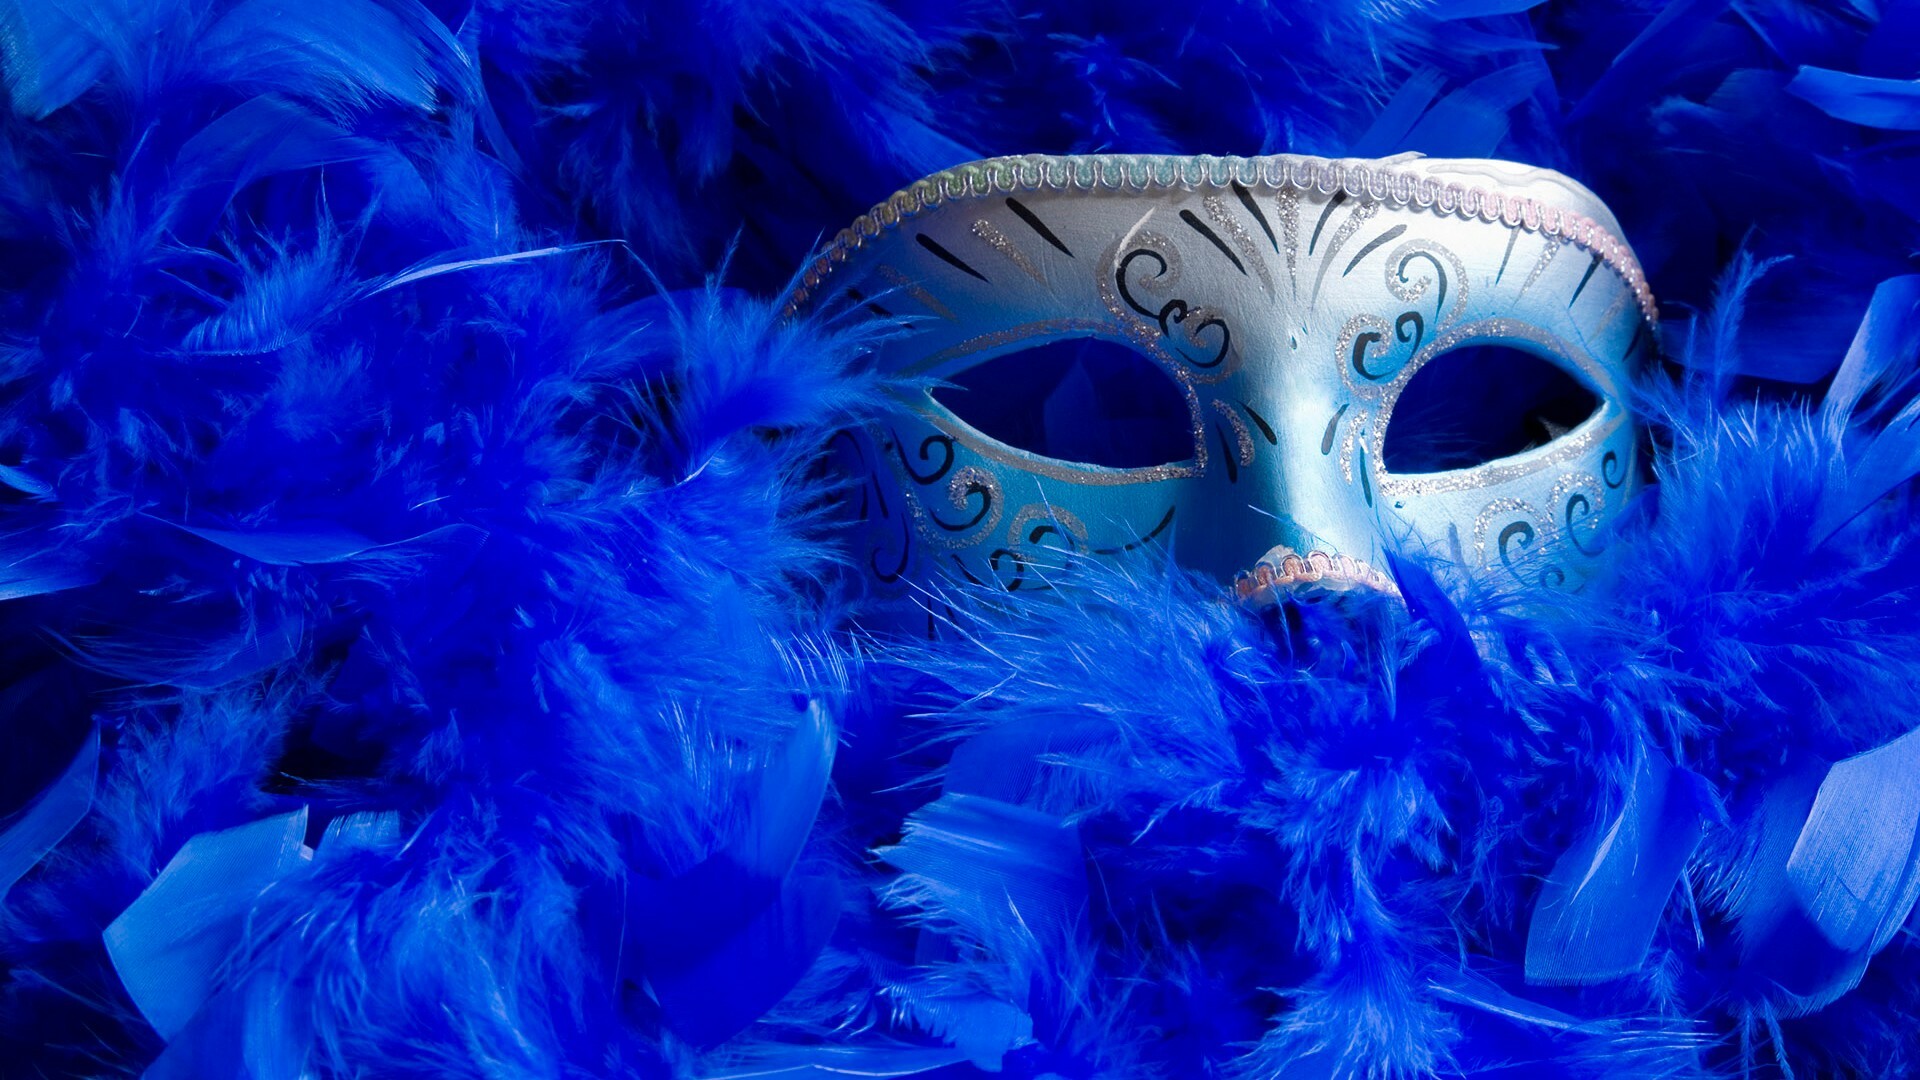 Carnival: Venetian masks, Recognized by their intricate design, baroque style decorations. 1920x1080 Full HD Wallpaper.